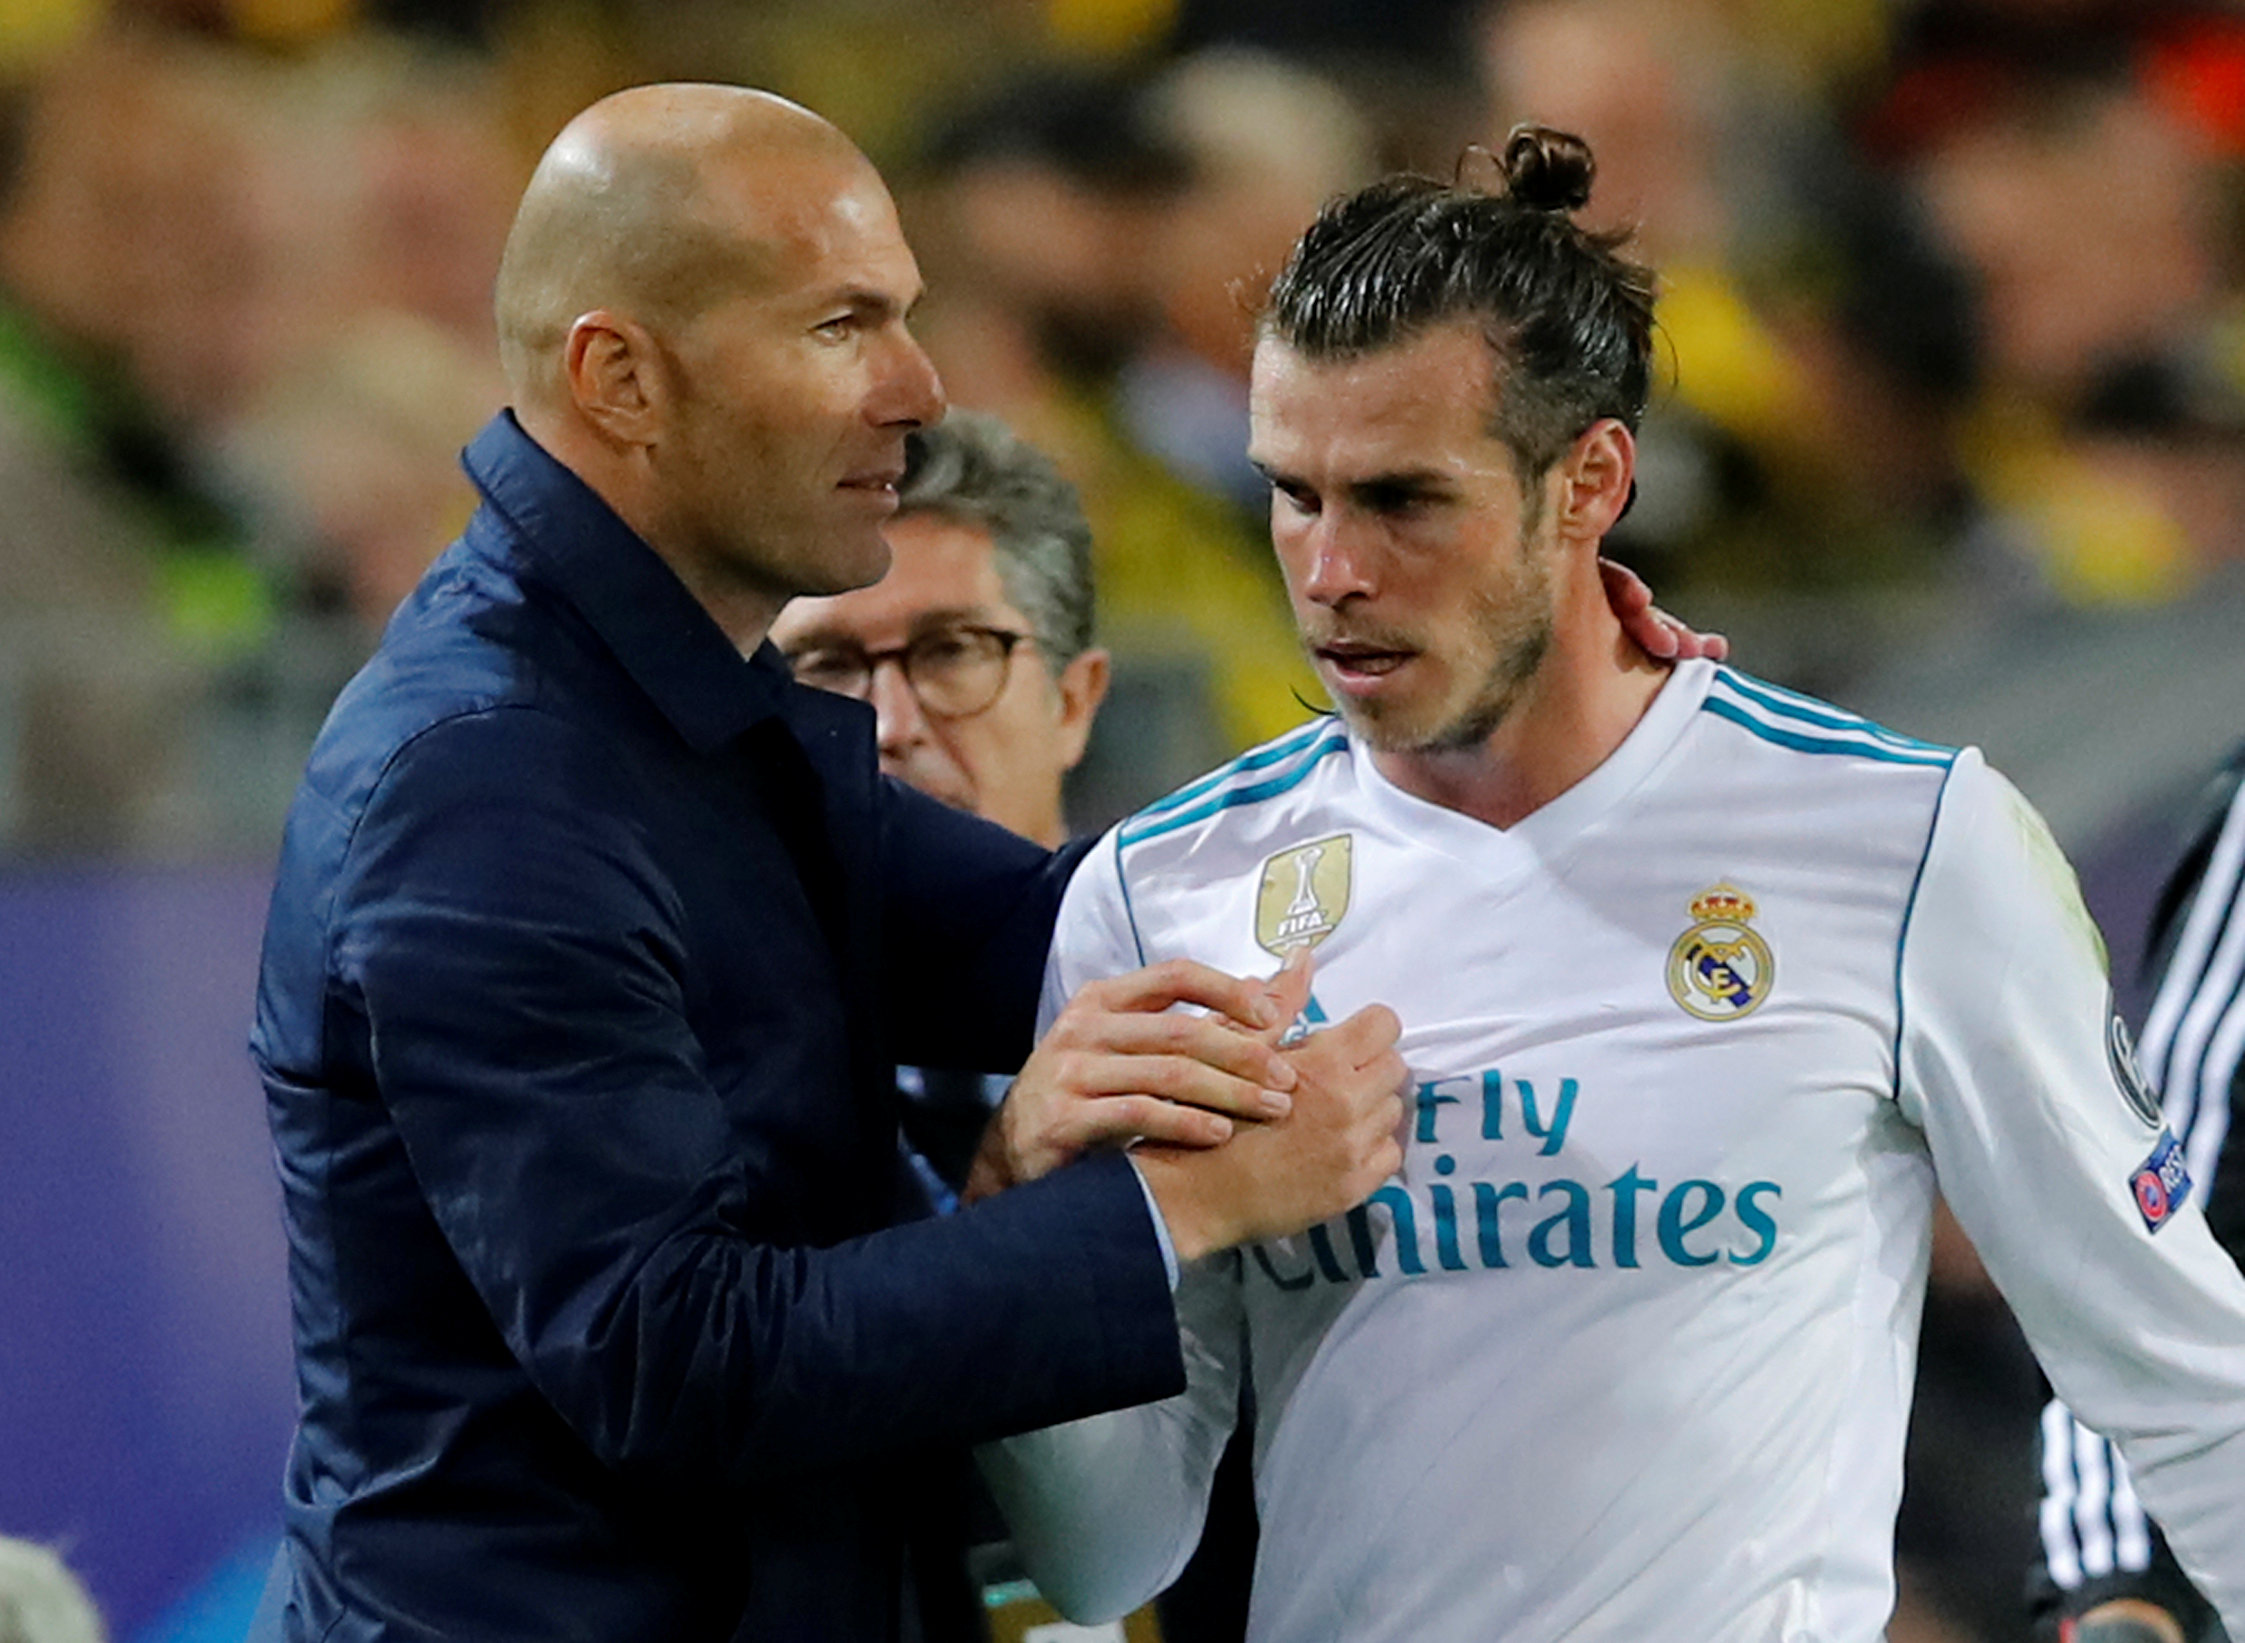 Football: Bale doubtful for Real and Wales with calf injury